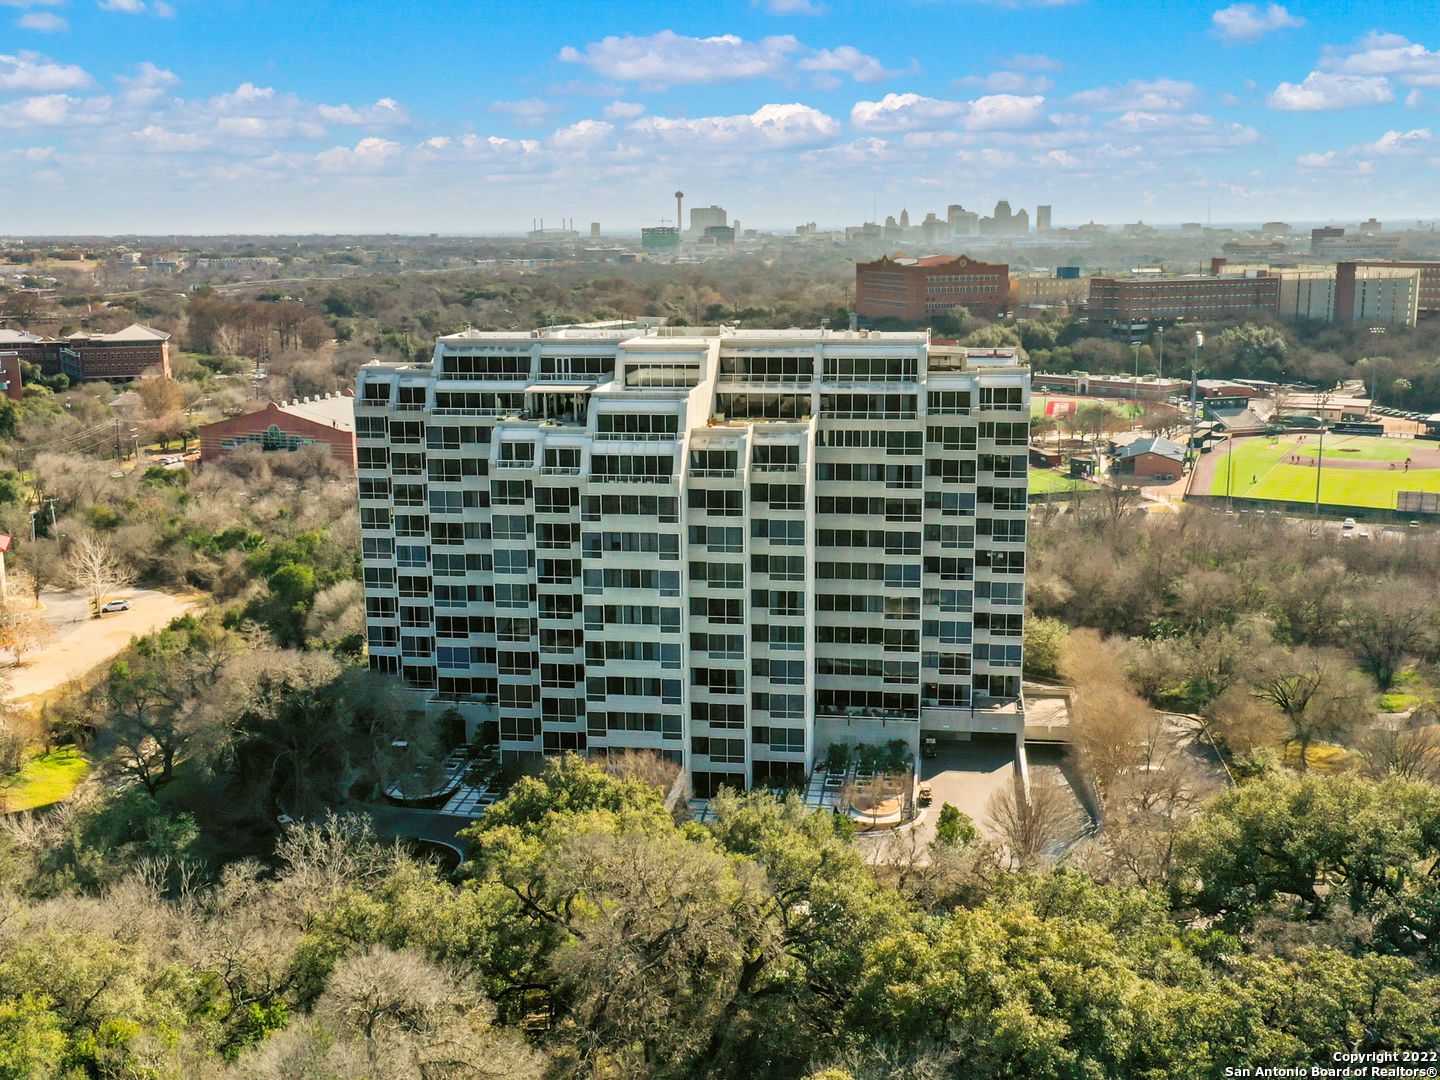 Luxurious high-rise living found within prime Alamo Heights location at the Patterson. Stunning panoramic views and ample natural lighting flooding the interiors with great views of the river. Open concept living with high ceilings complete with a gourmet kitchen with extensive cabinetry space, gorgeous hardwood floors and upgraded fixtures. Oversized master retreat with private balcony, large bathroom, double vanities, and large walk-in closet. Spacious guest bedroom appointed with the same luxe finish out. Word class amenities to include 24/7 concierge, private pool & party room, gym, tennis courts / pickle ball, library, conference room and walking trails